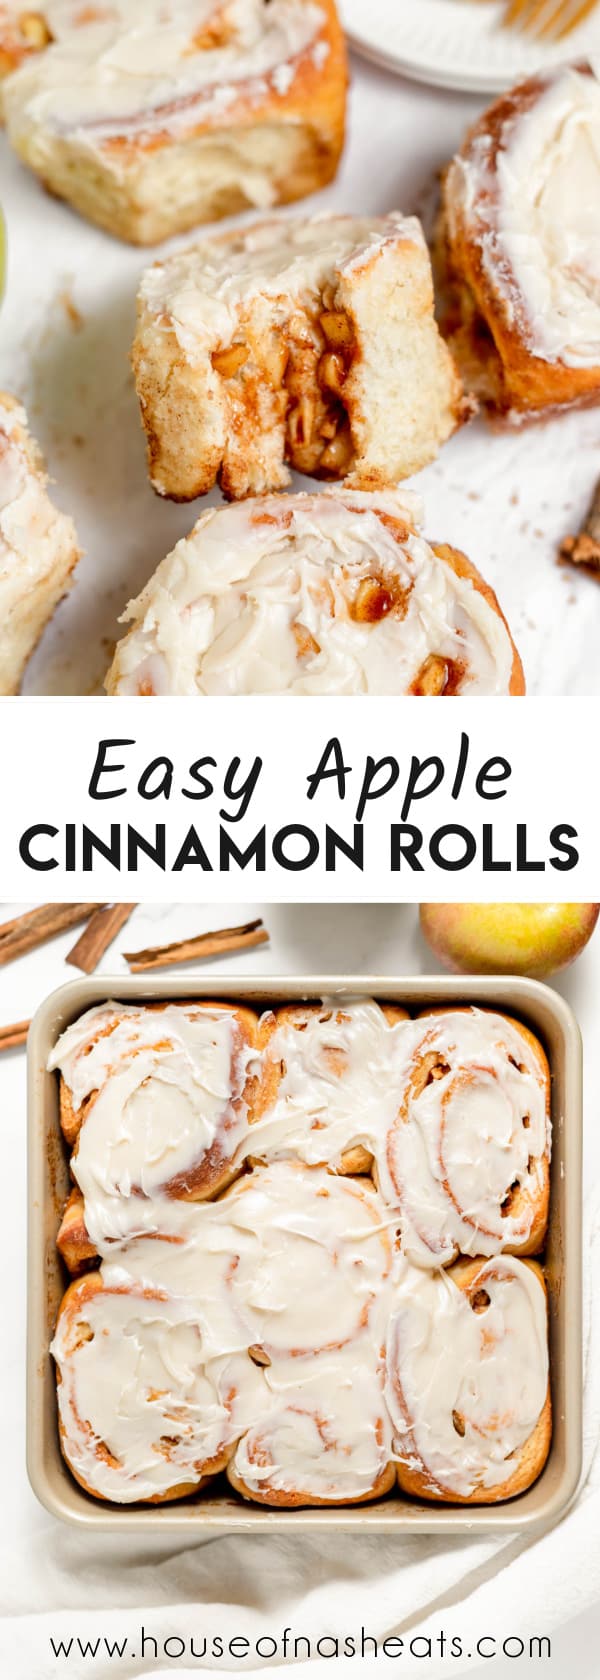 A collage of images of apple cinnamon rolls with text overlay.